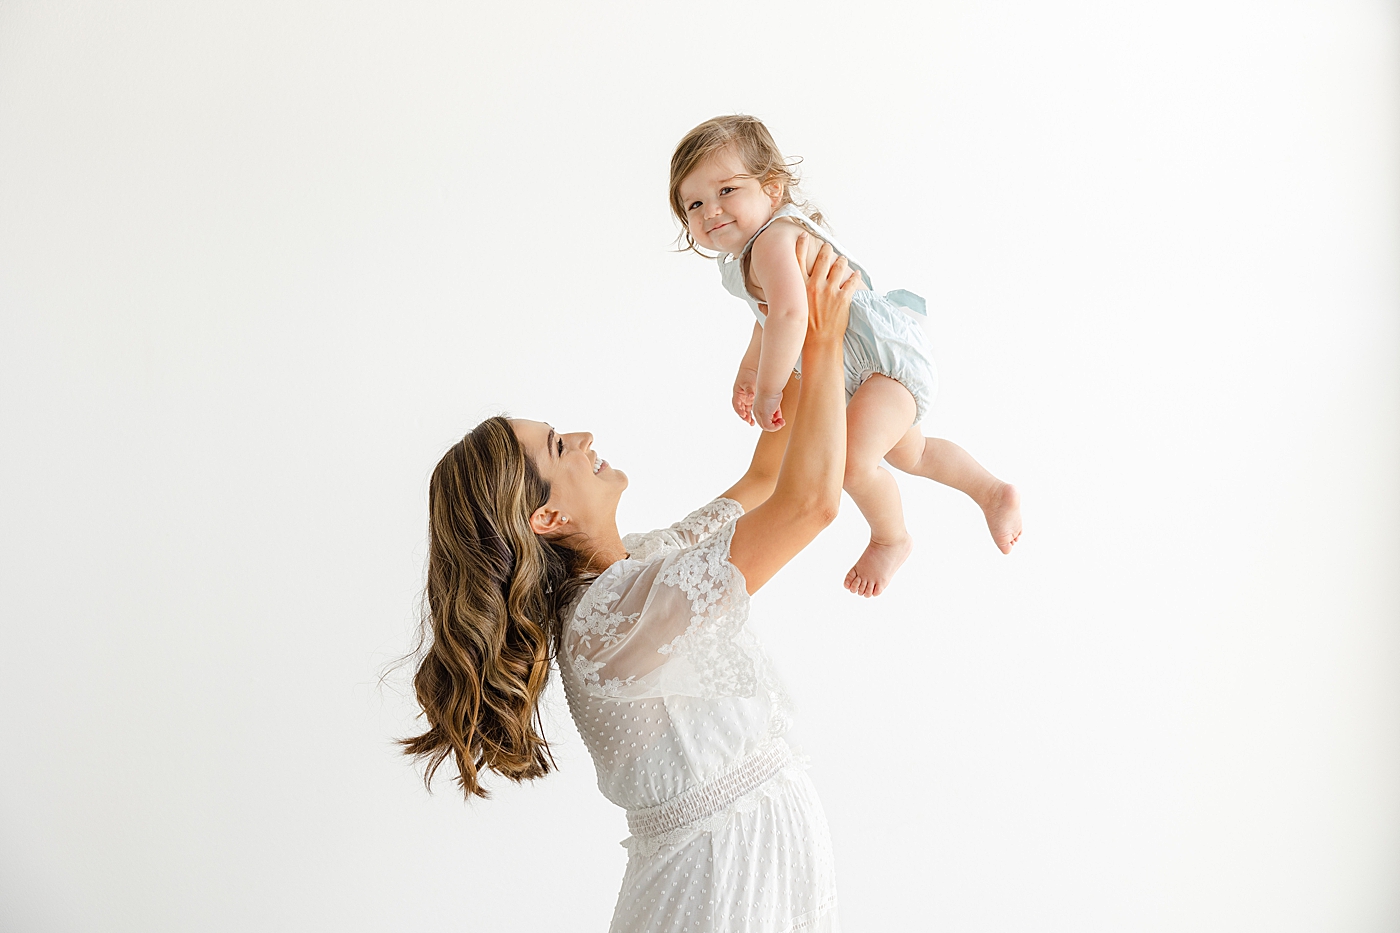 Mom playing airplane with her baby girl during their Studio Family Session | Photo by Sana Ahmed Photography